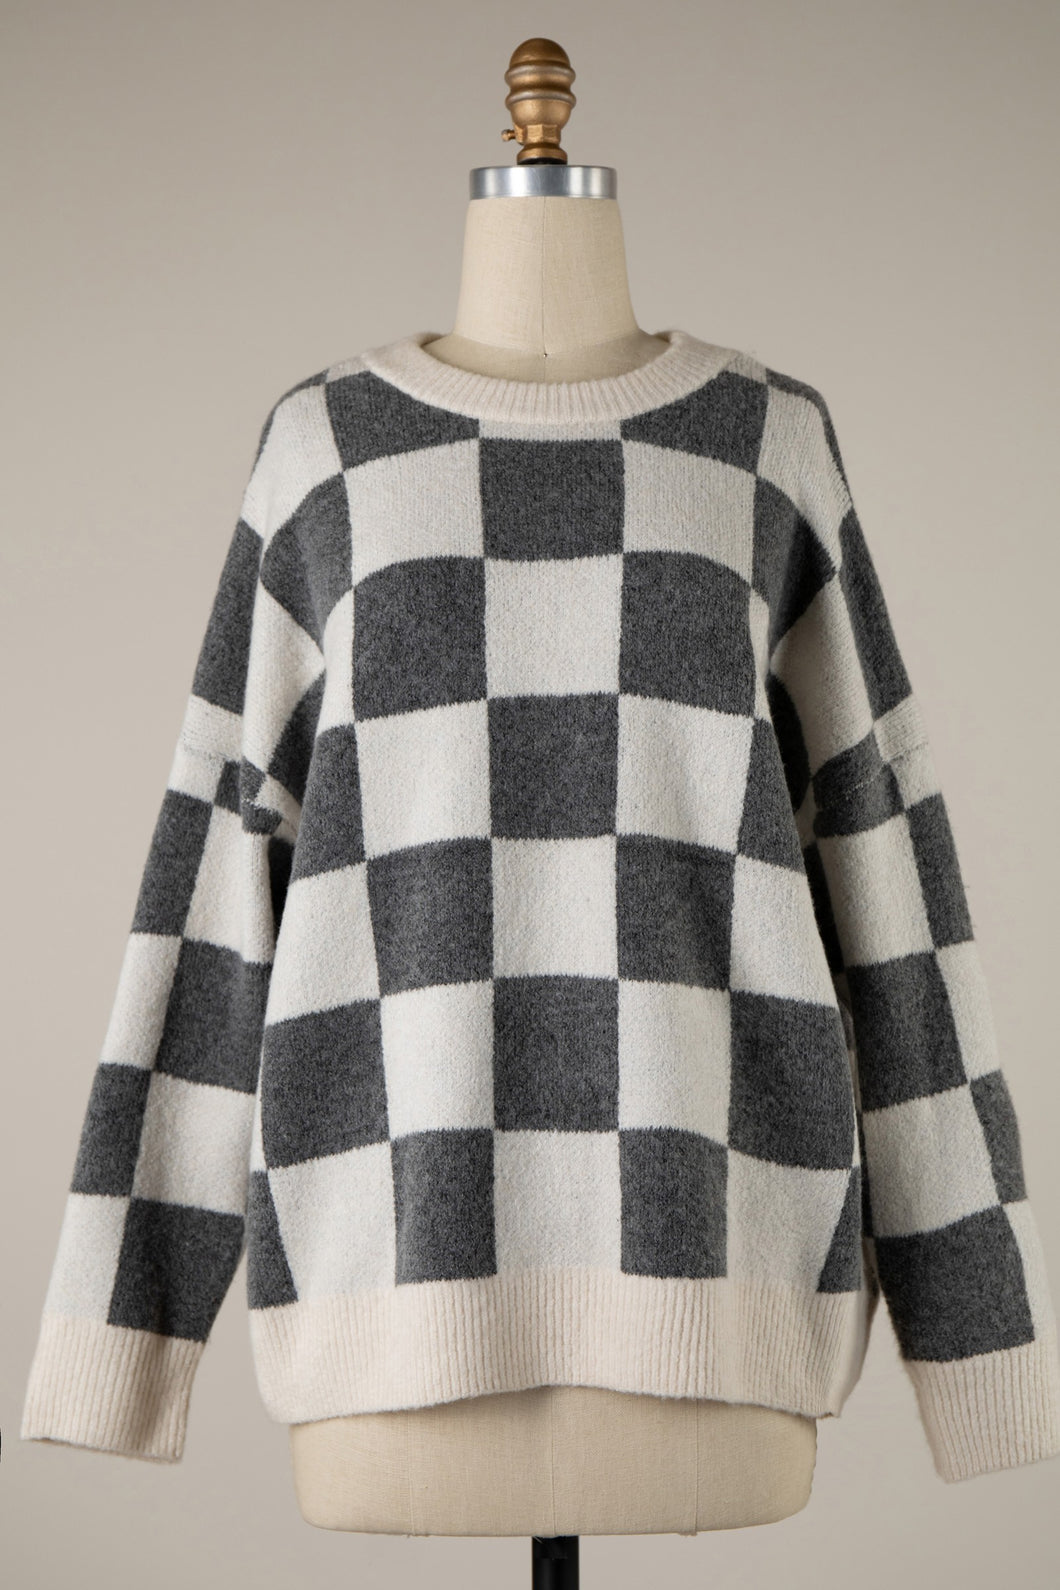 Vintage Checkered Sweater